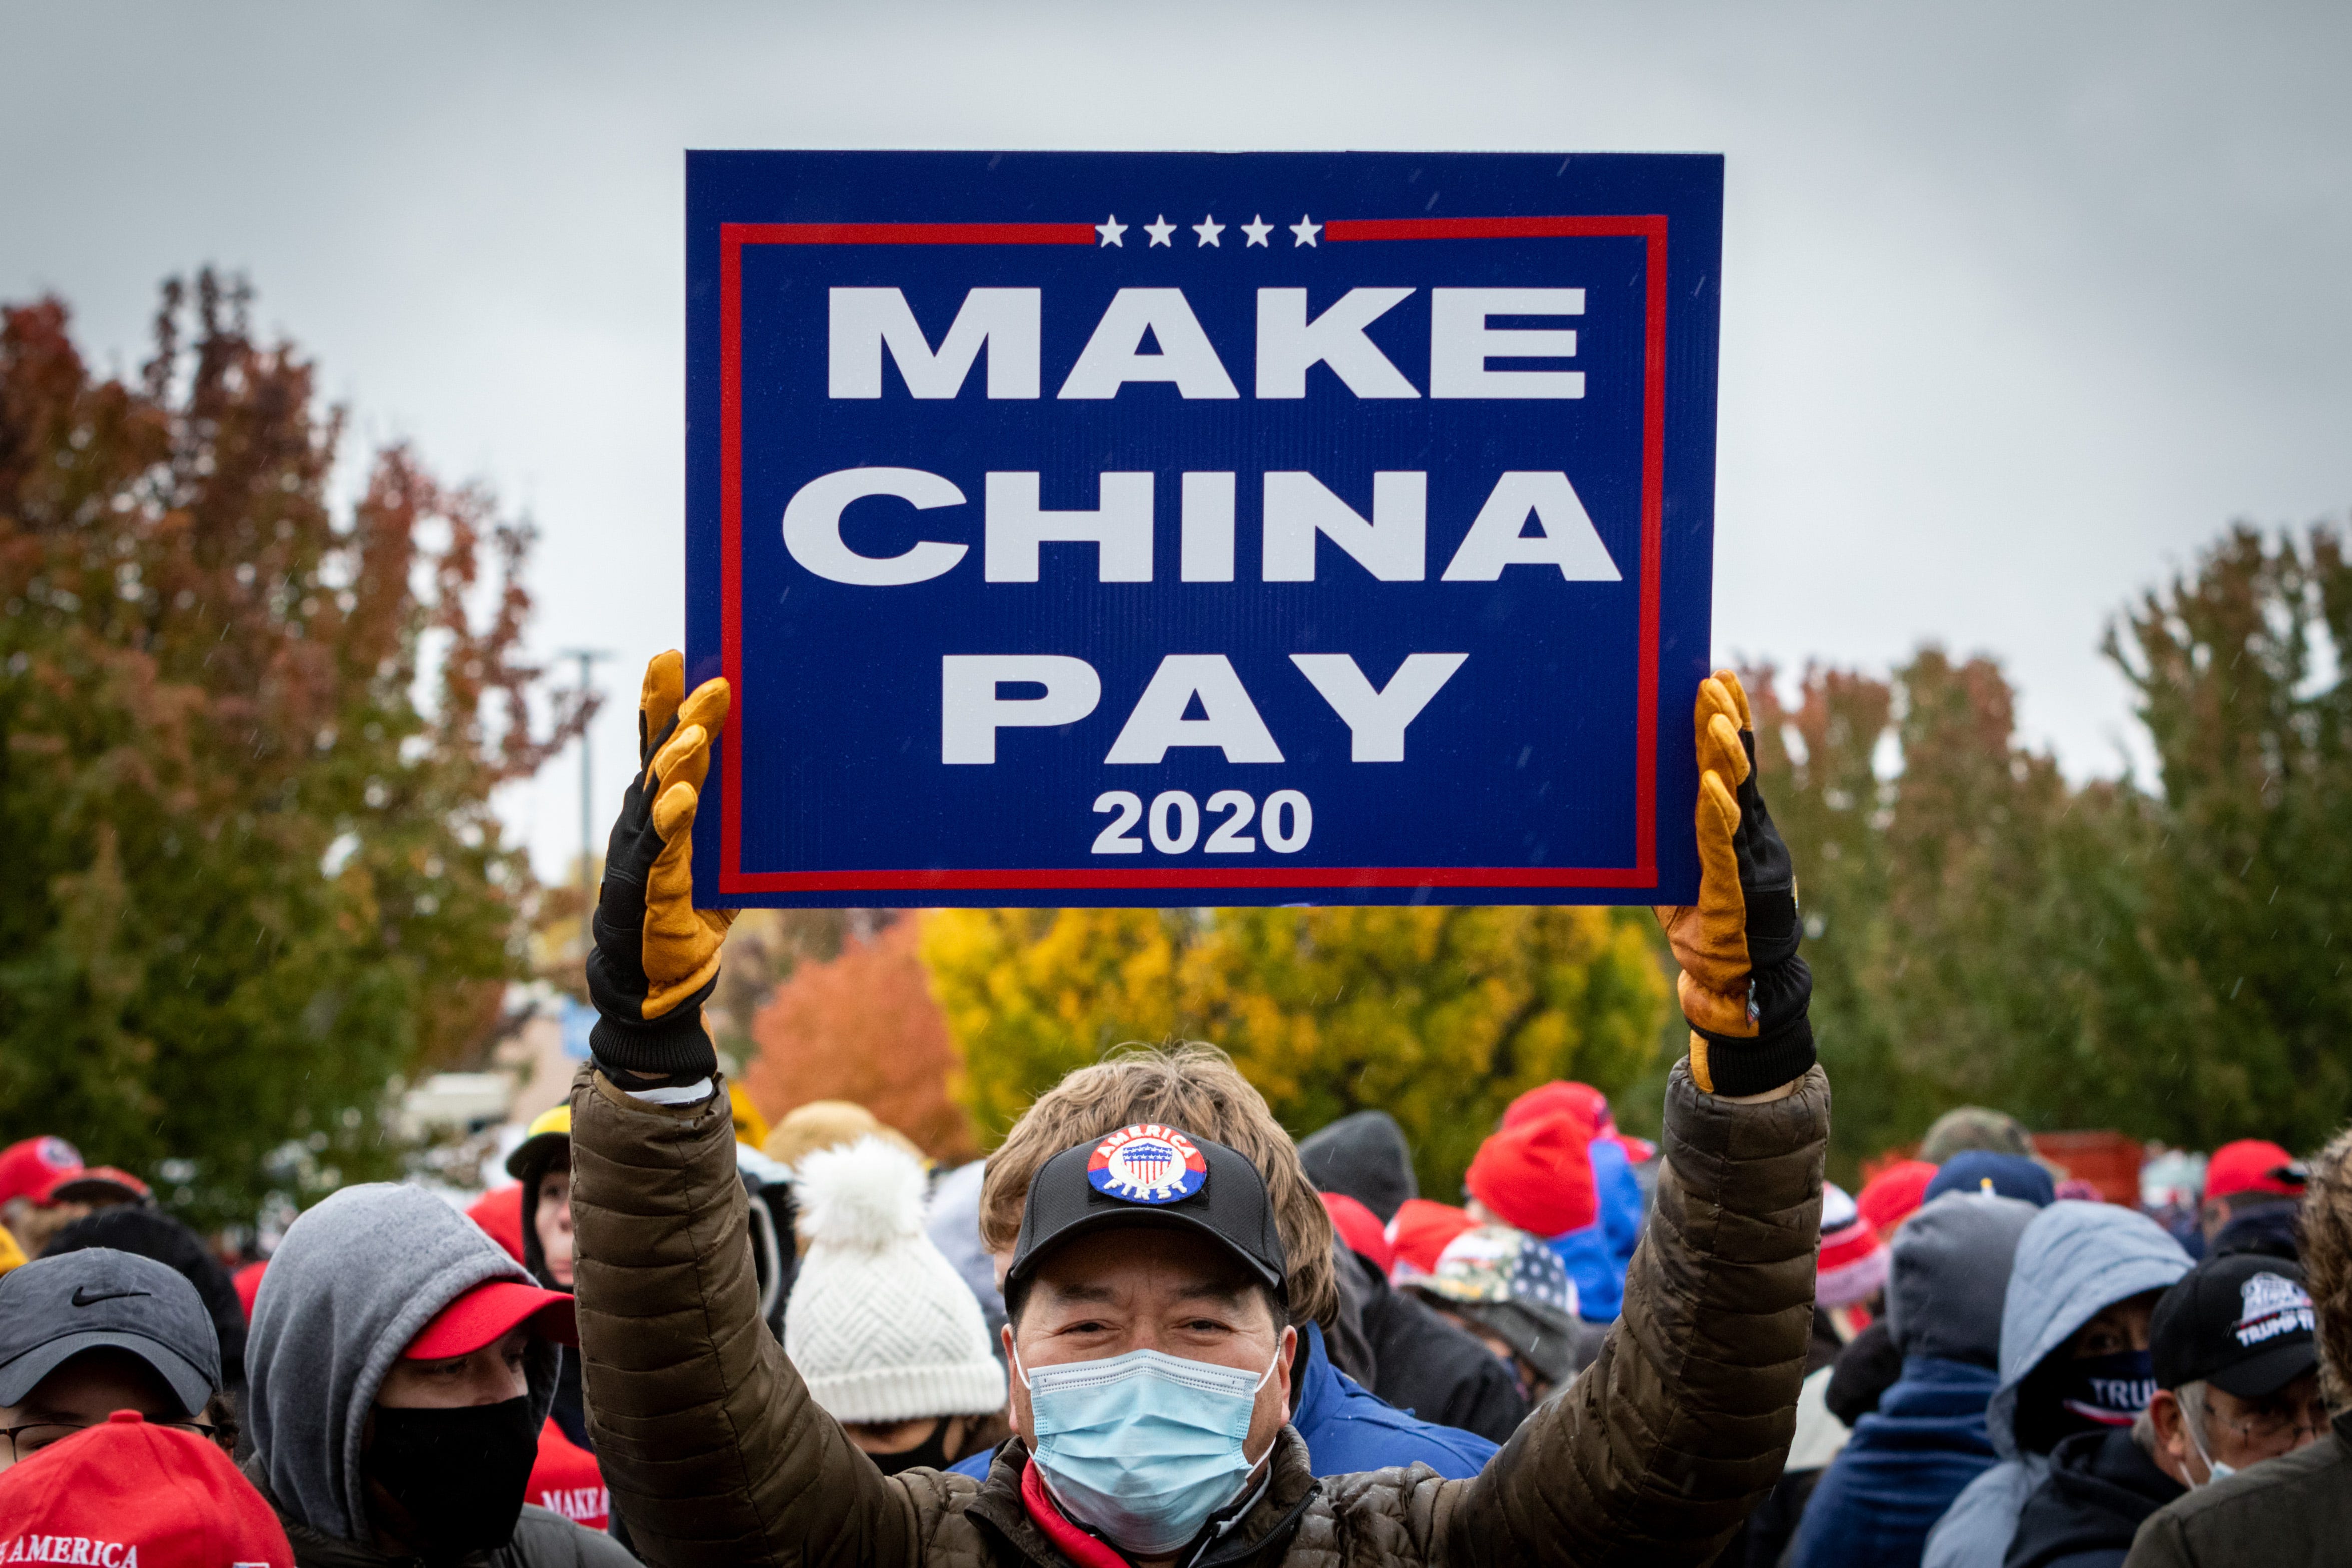 Michale Lee of DeWitt holds a sign in support of Donald Trump's efforts to hold China accountable for their trade practices, espionage, and cybersecurity.